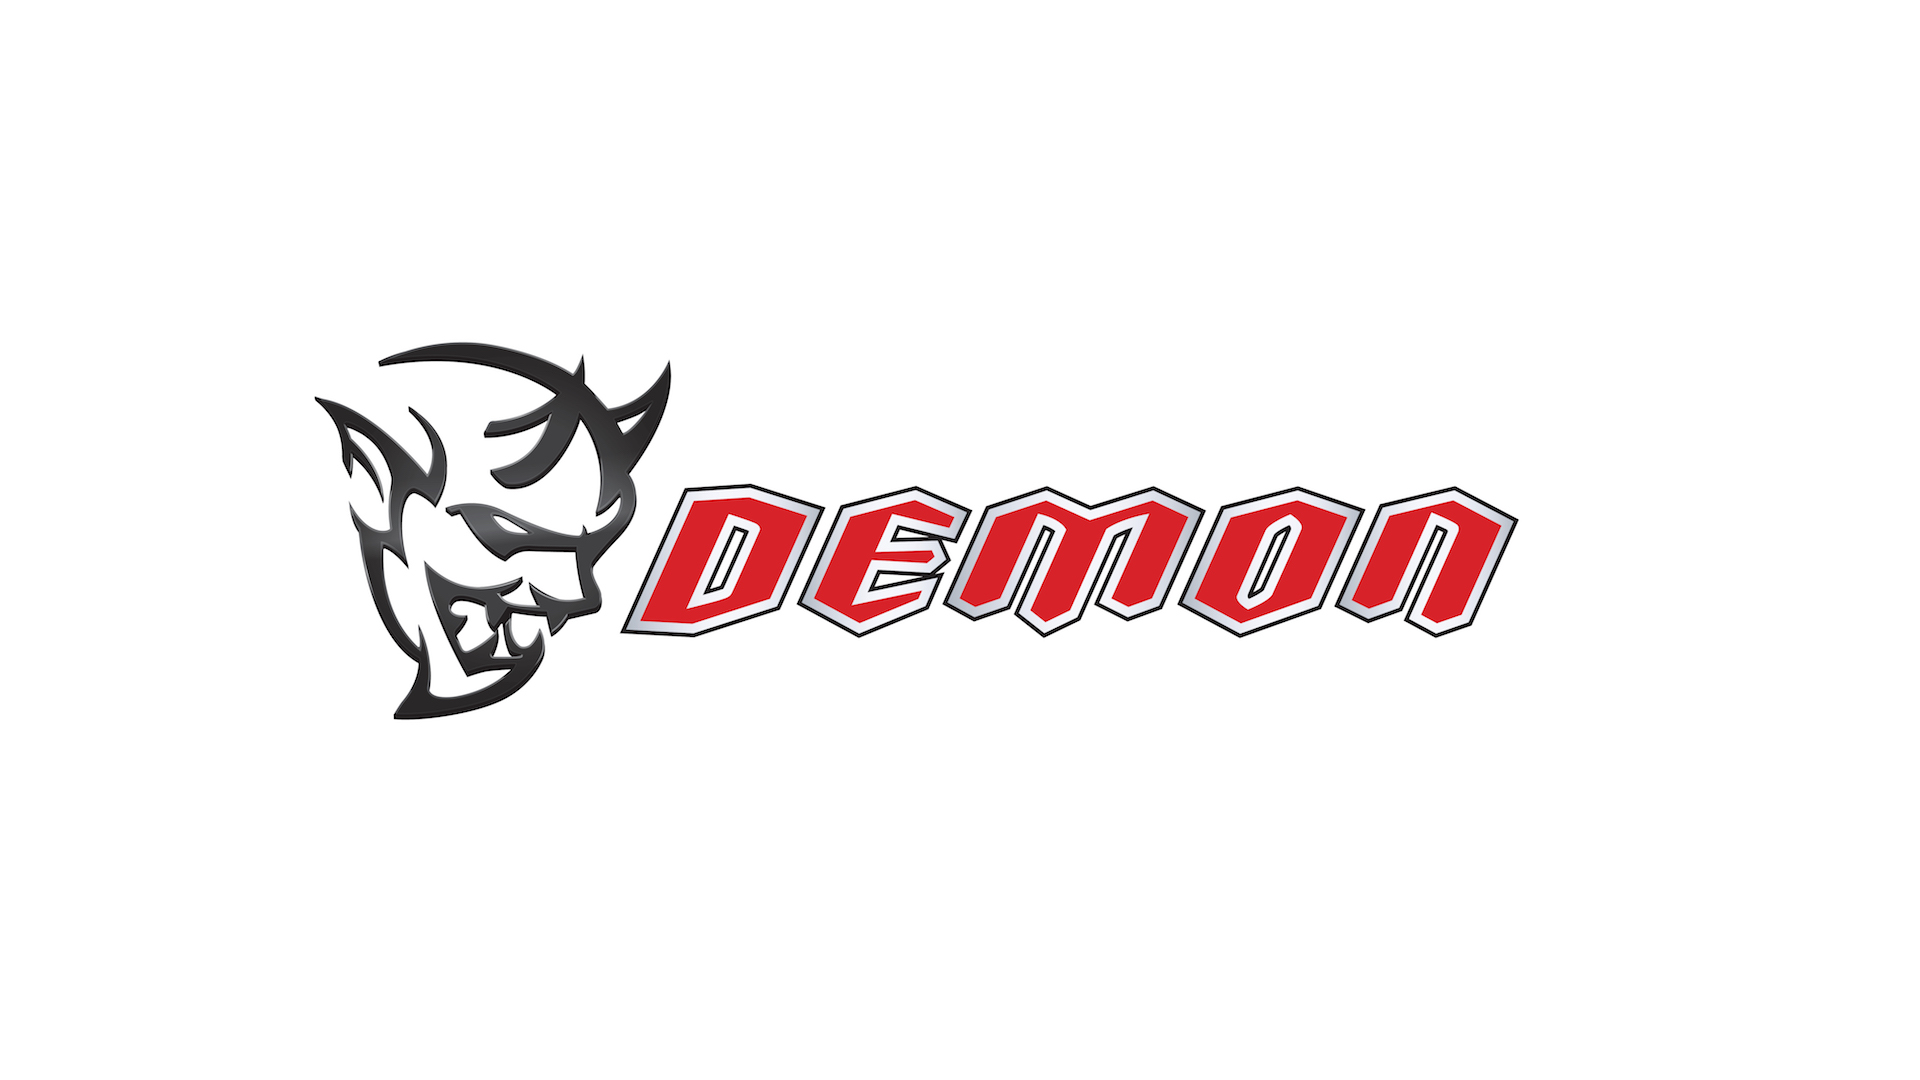 The 2018 Dodge Challenger SRT Demon will be a meaner Hellcat halo car